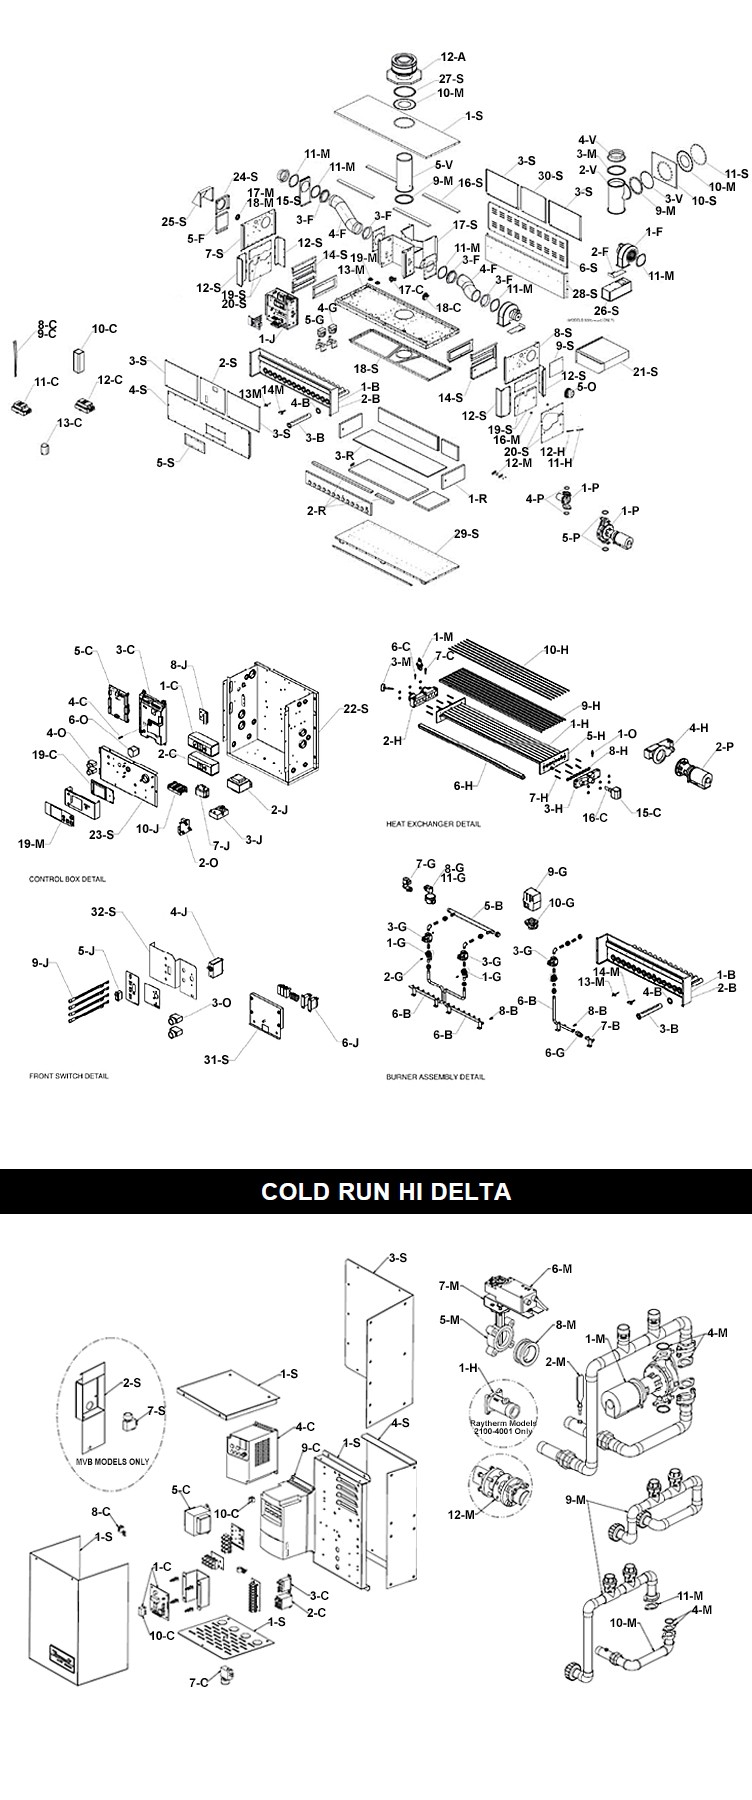 Raypak HI Delta Cold Run P-752C Commercial Indoor-Outdoor Swimming Pool Heater | Natural Gas 750,000 BTUH | 016086 Parts Schematic